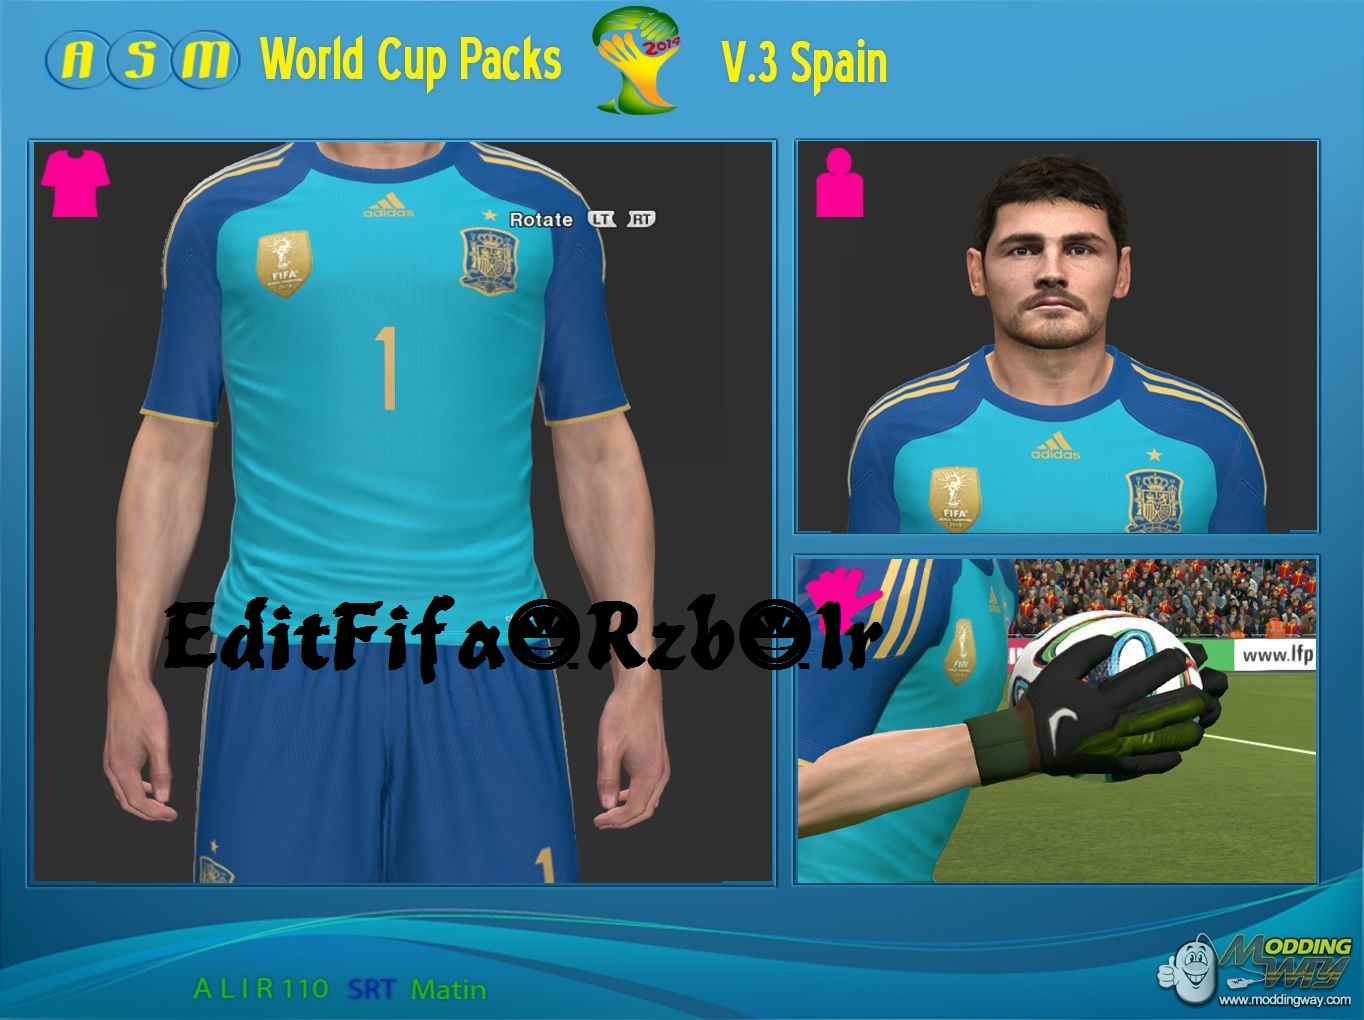 World Cup Pack V.3 (Spain) By A.S.M